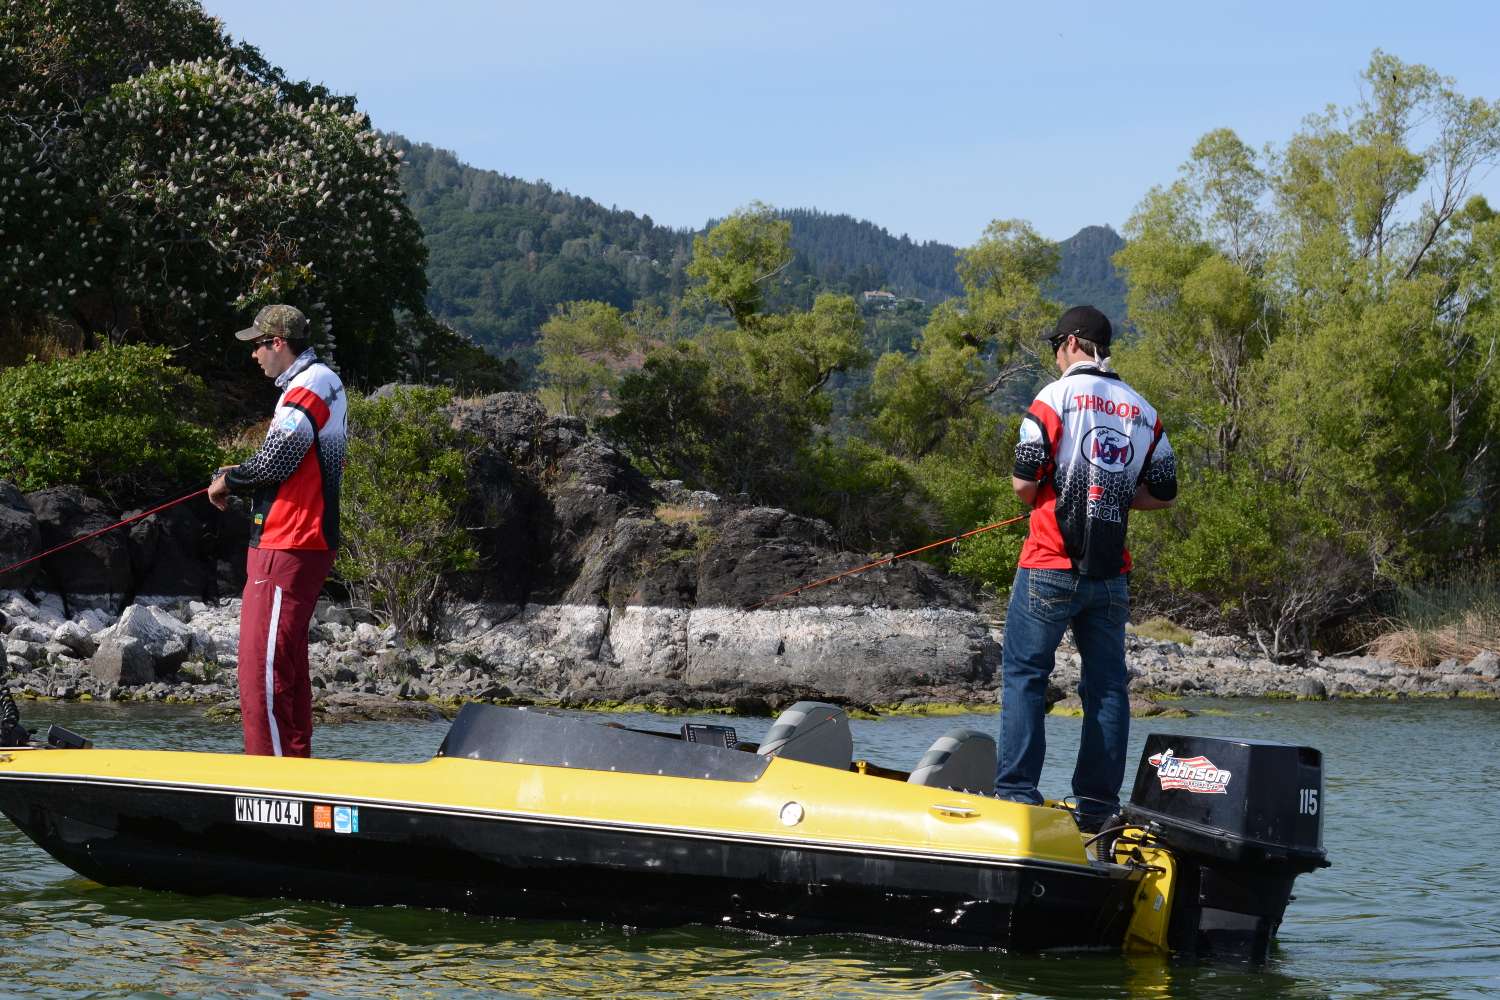 Travis Opel and Taylor Throop of Eastern Washington University had two bass in the boat by mid-morning.